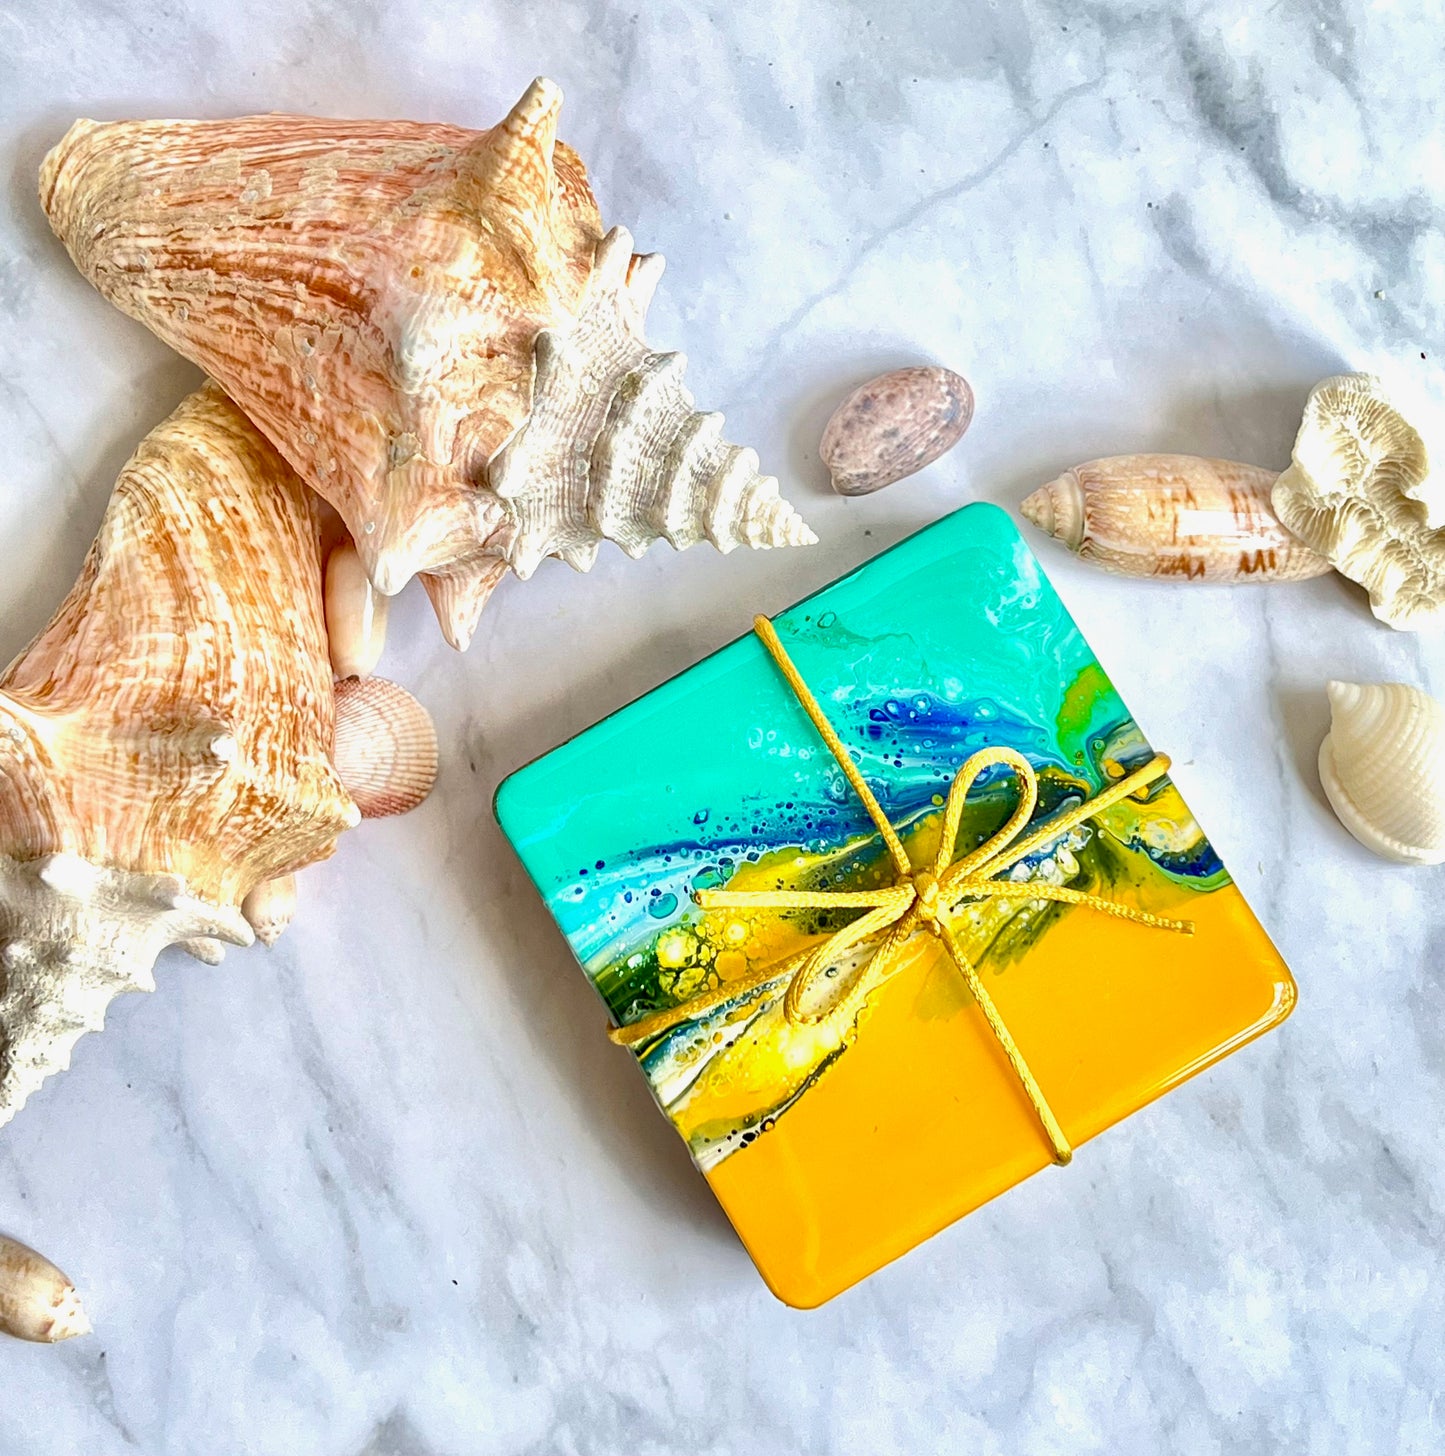 Colorful Acrylic Paint Epoxy Resin Coasters Set Of Four: Great Gift For Him, Her or Housewarming. Coastal Charm For Your Bar Or Coffee Table